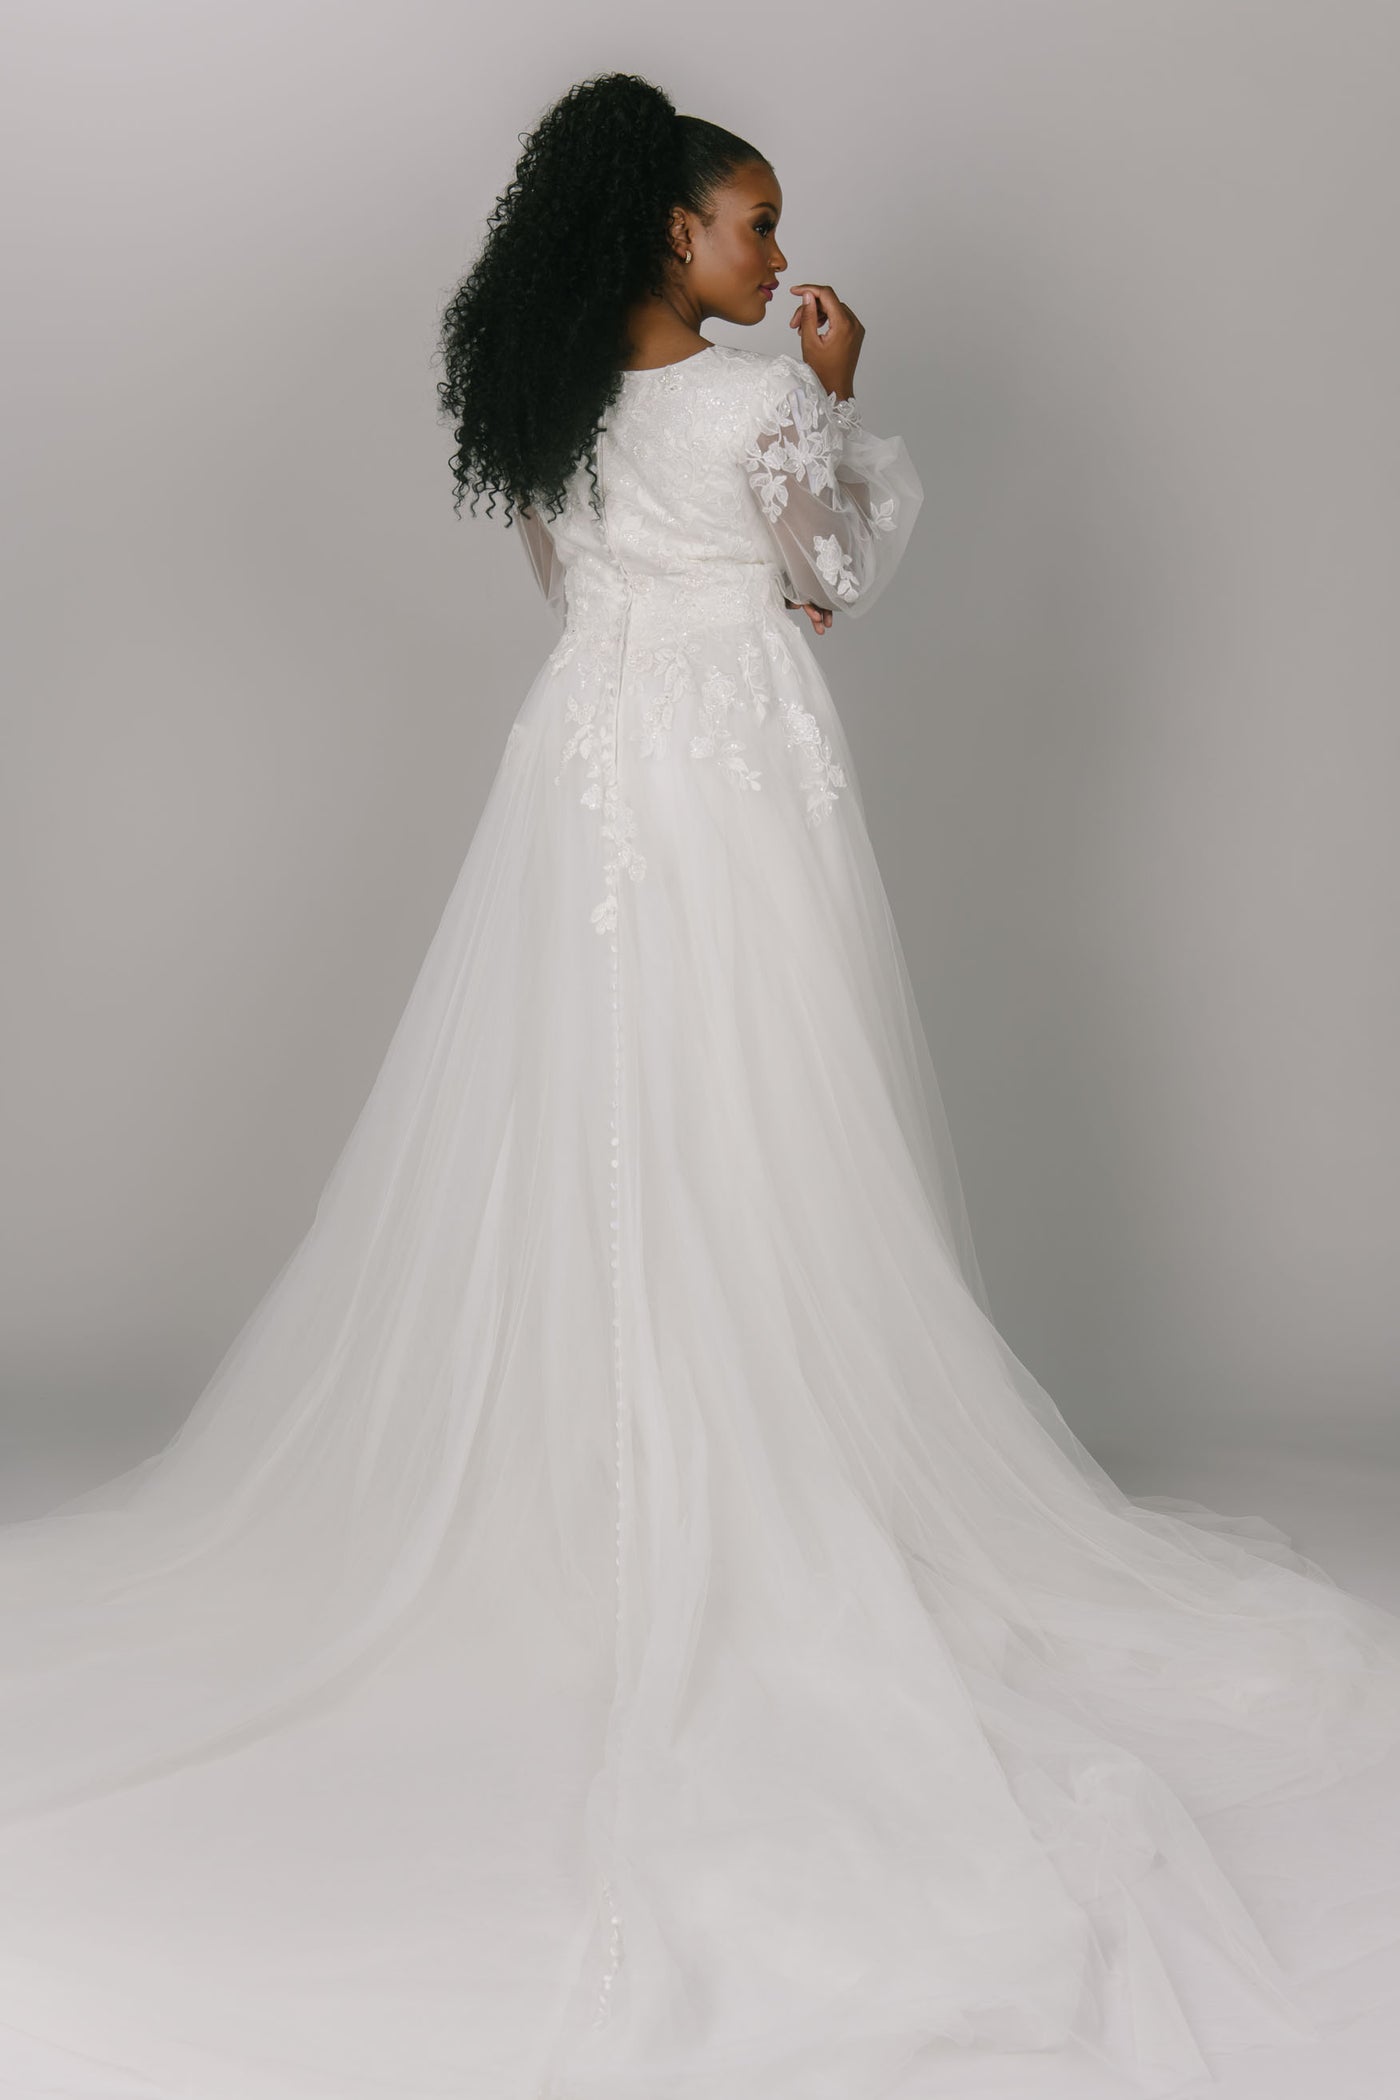 Back view of modest wedding dress, featuring lace bishop sleeves. It has a sweetheart neckline and tulle skirt. It has leaf-like lace that covers the sleeves and top of the dress. The Benny dress is the perfect a-line modest wedding dress.